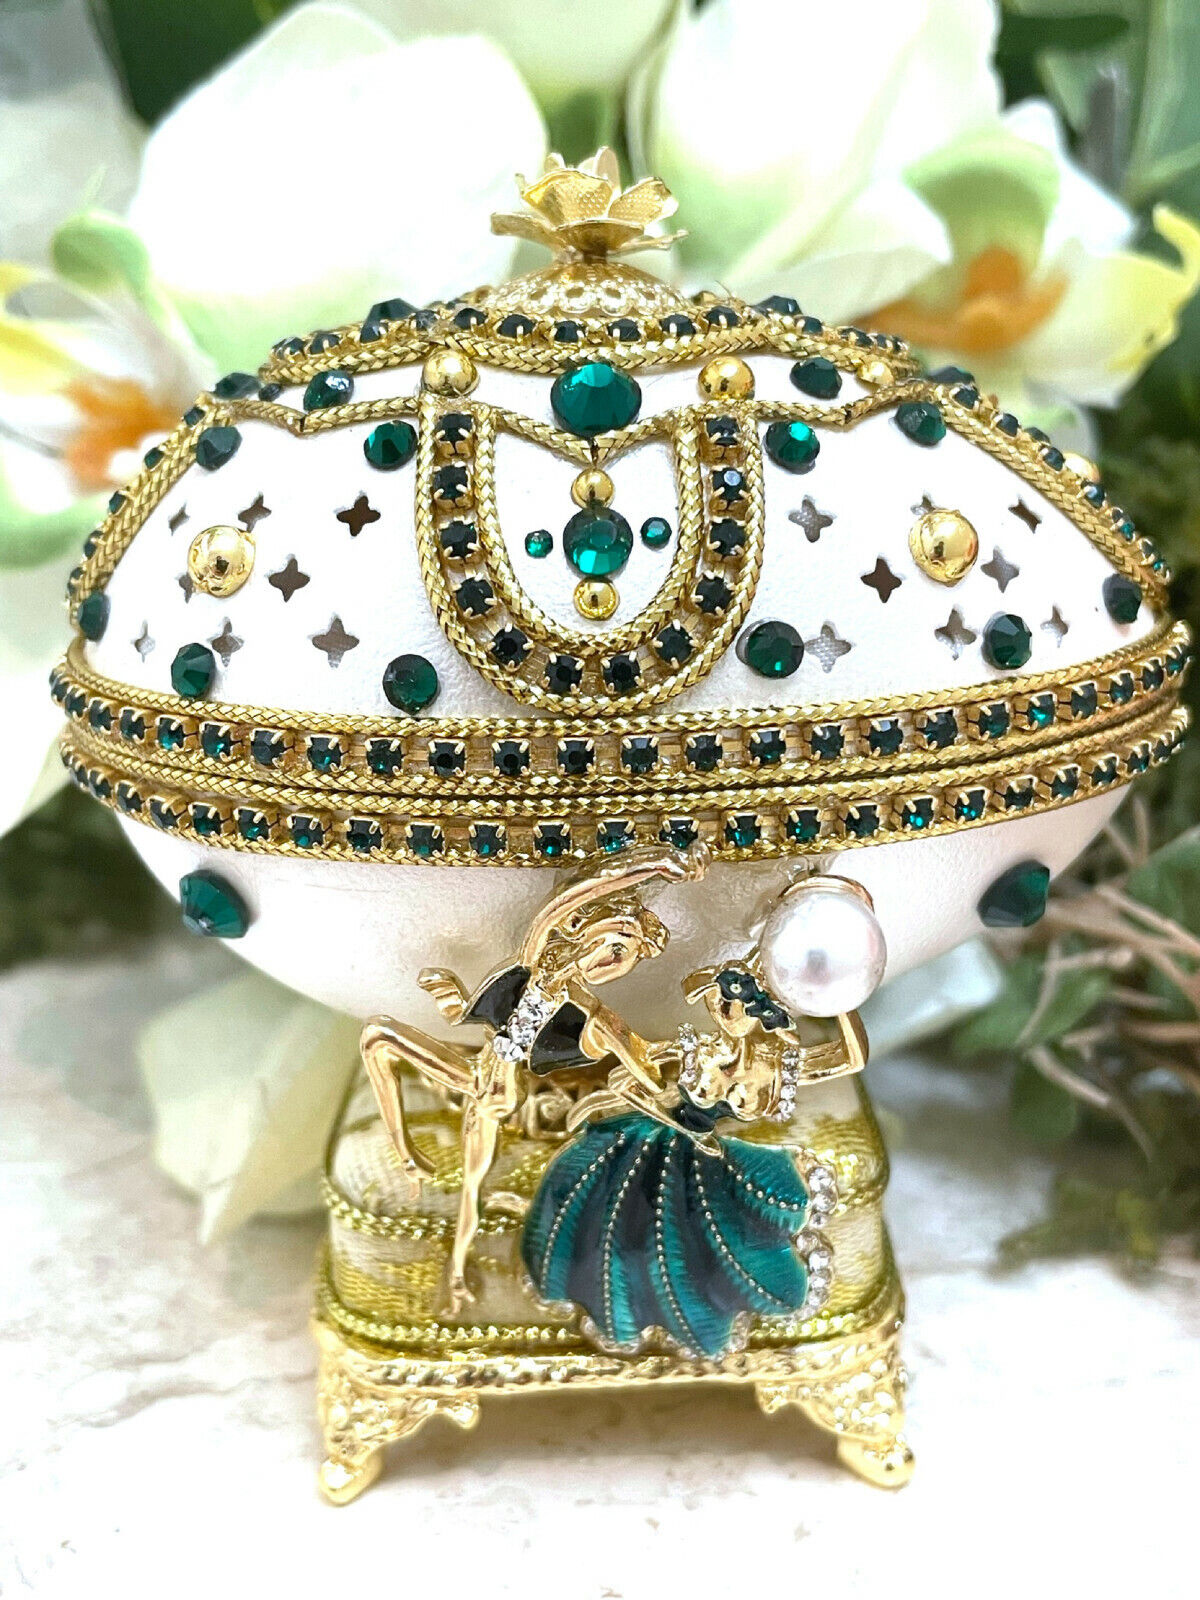 Faberge Egg Ornament Music Wedding Bridal shower gift Jewelry 24k GOLD Fabergé